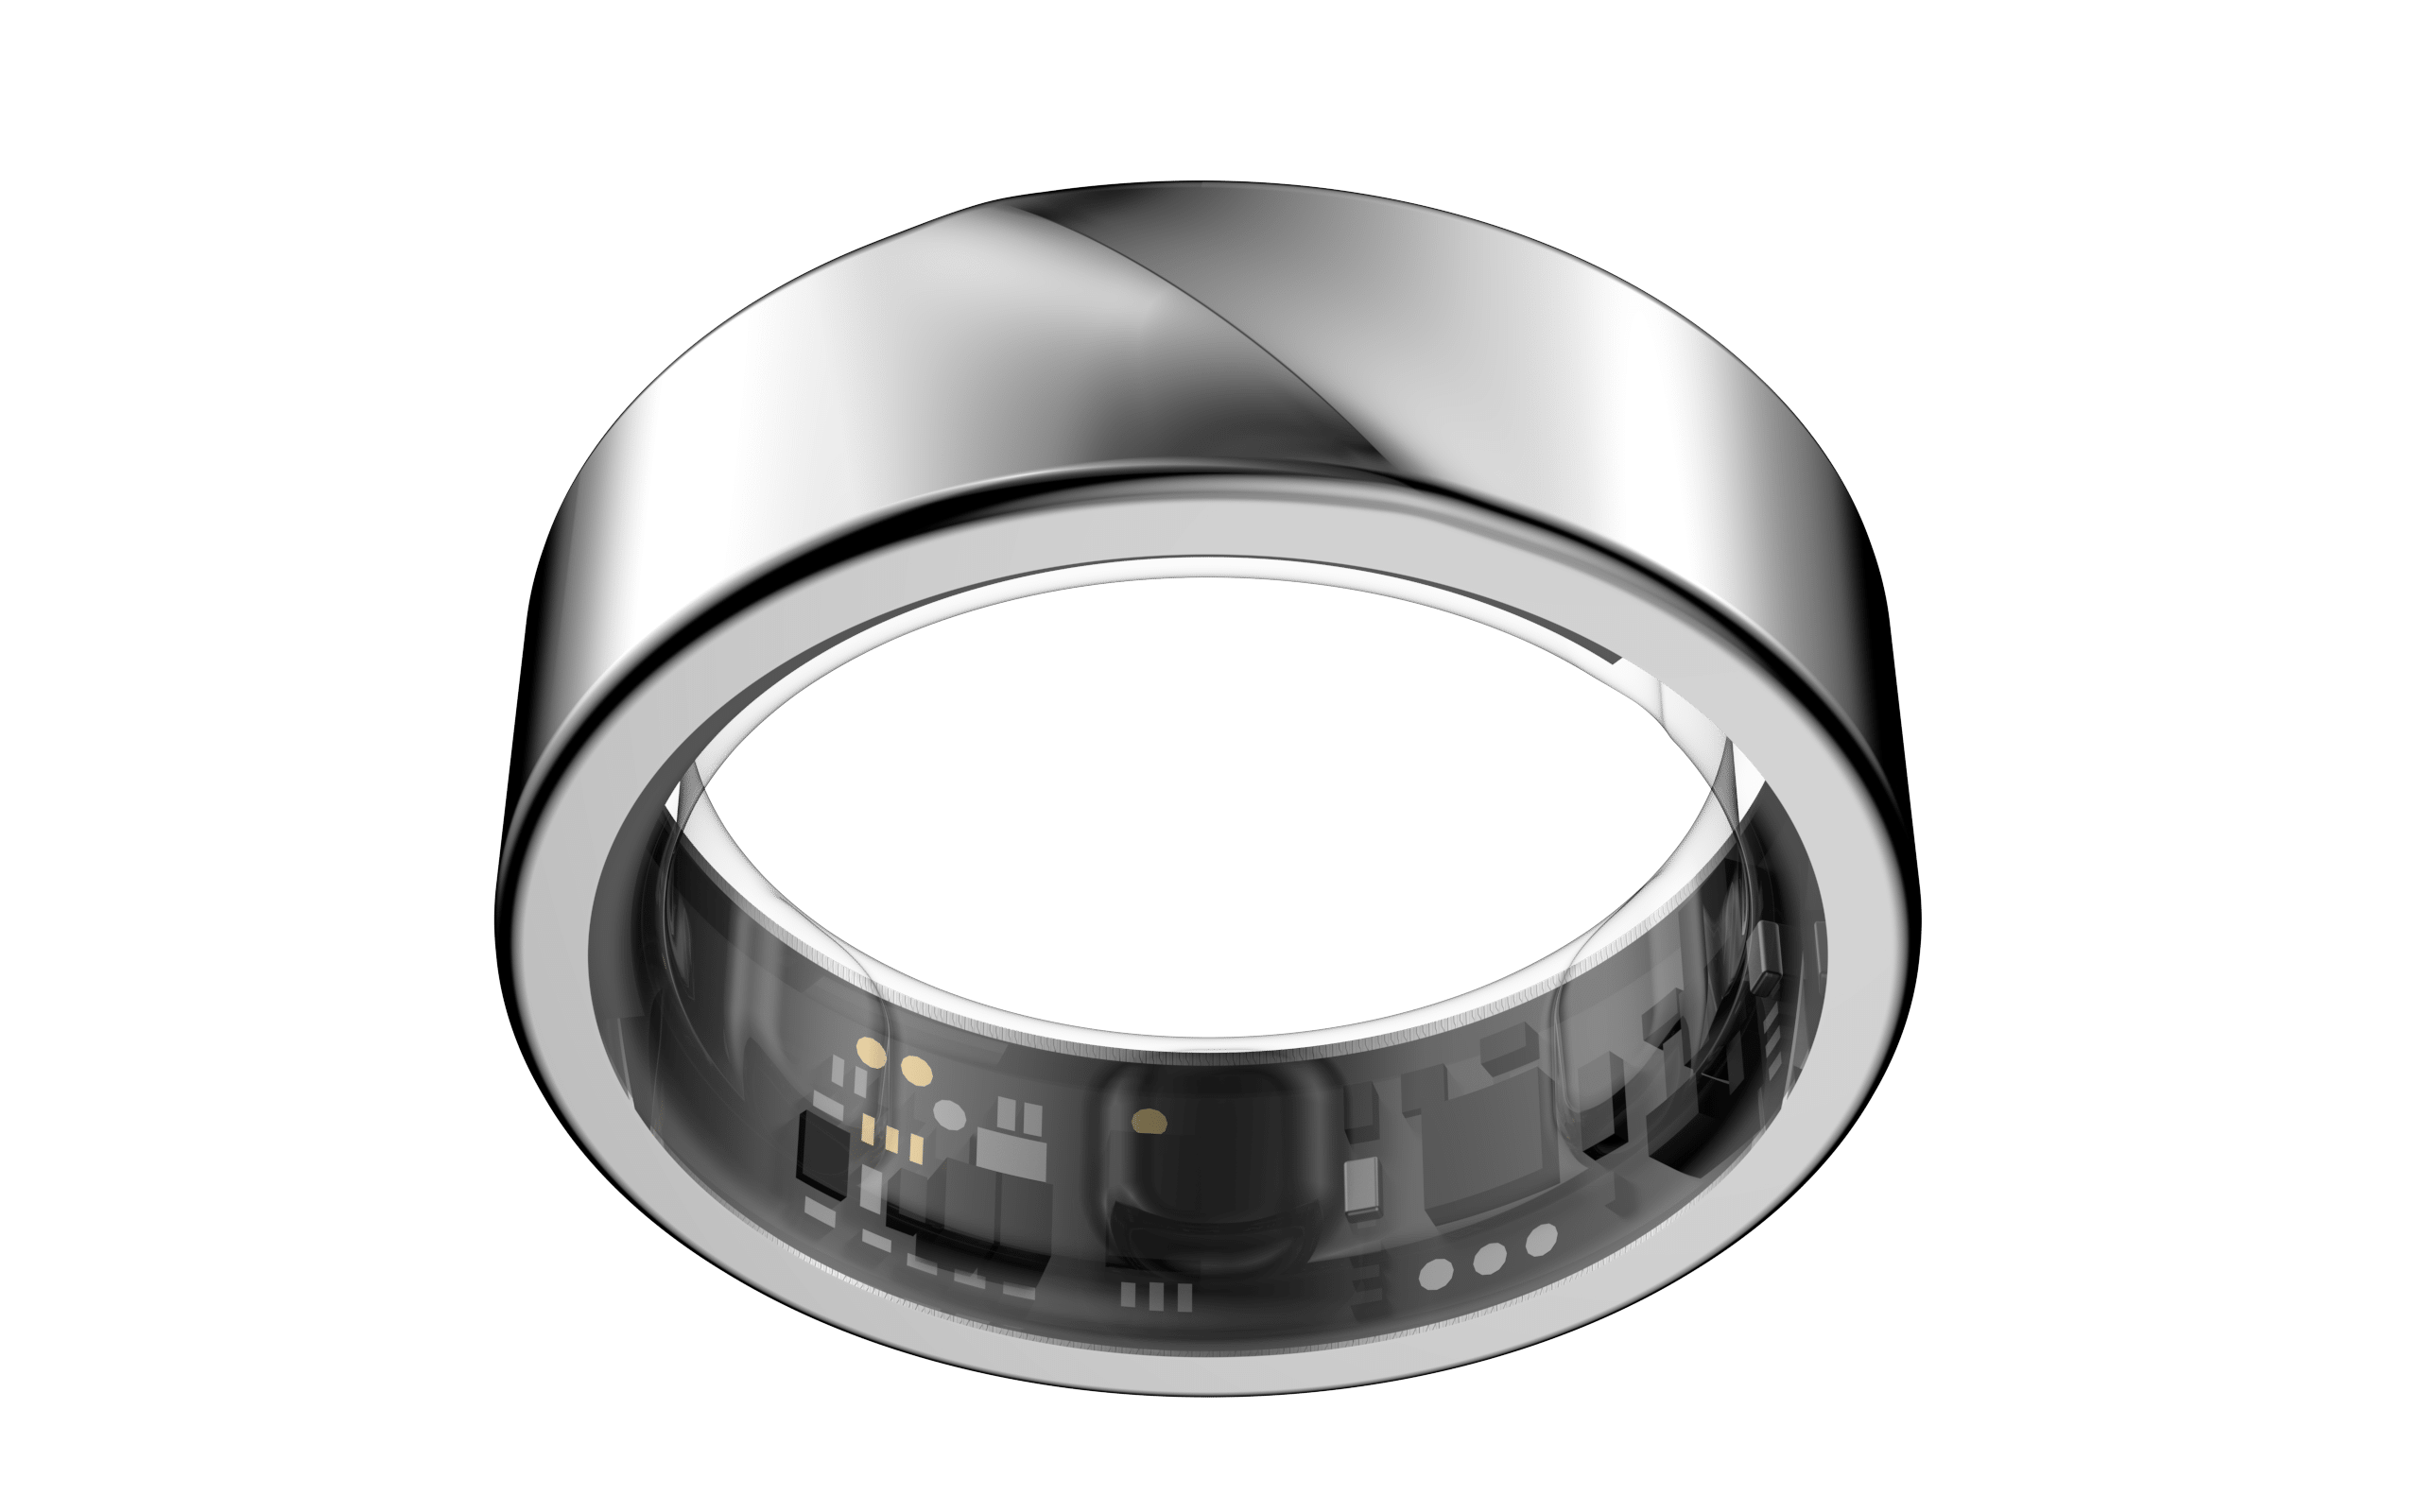 Noise Luna Ring smart ring launched in India: pre-order details